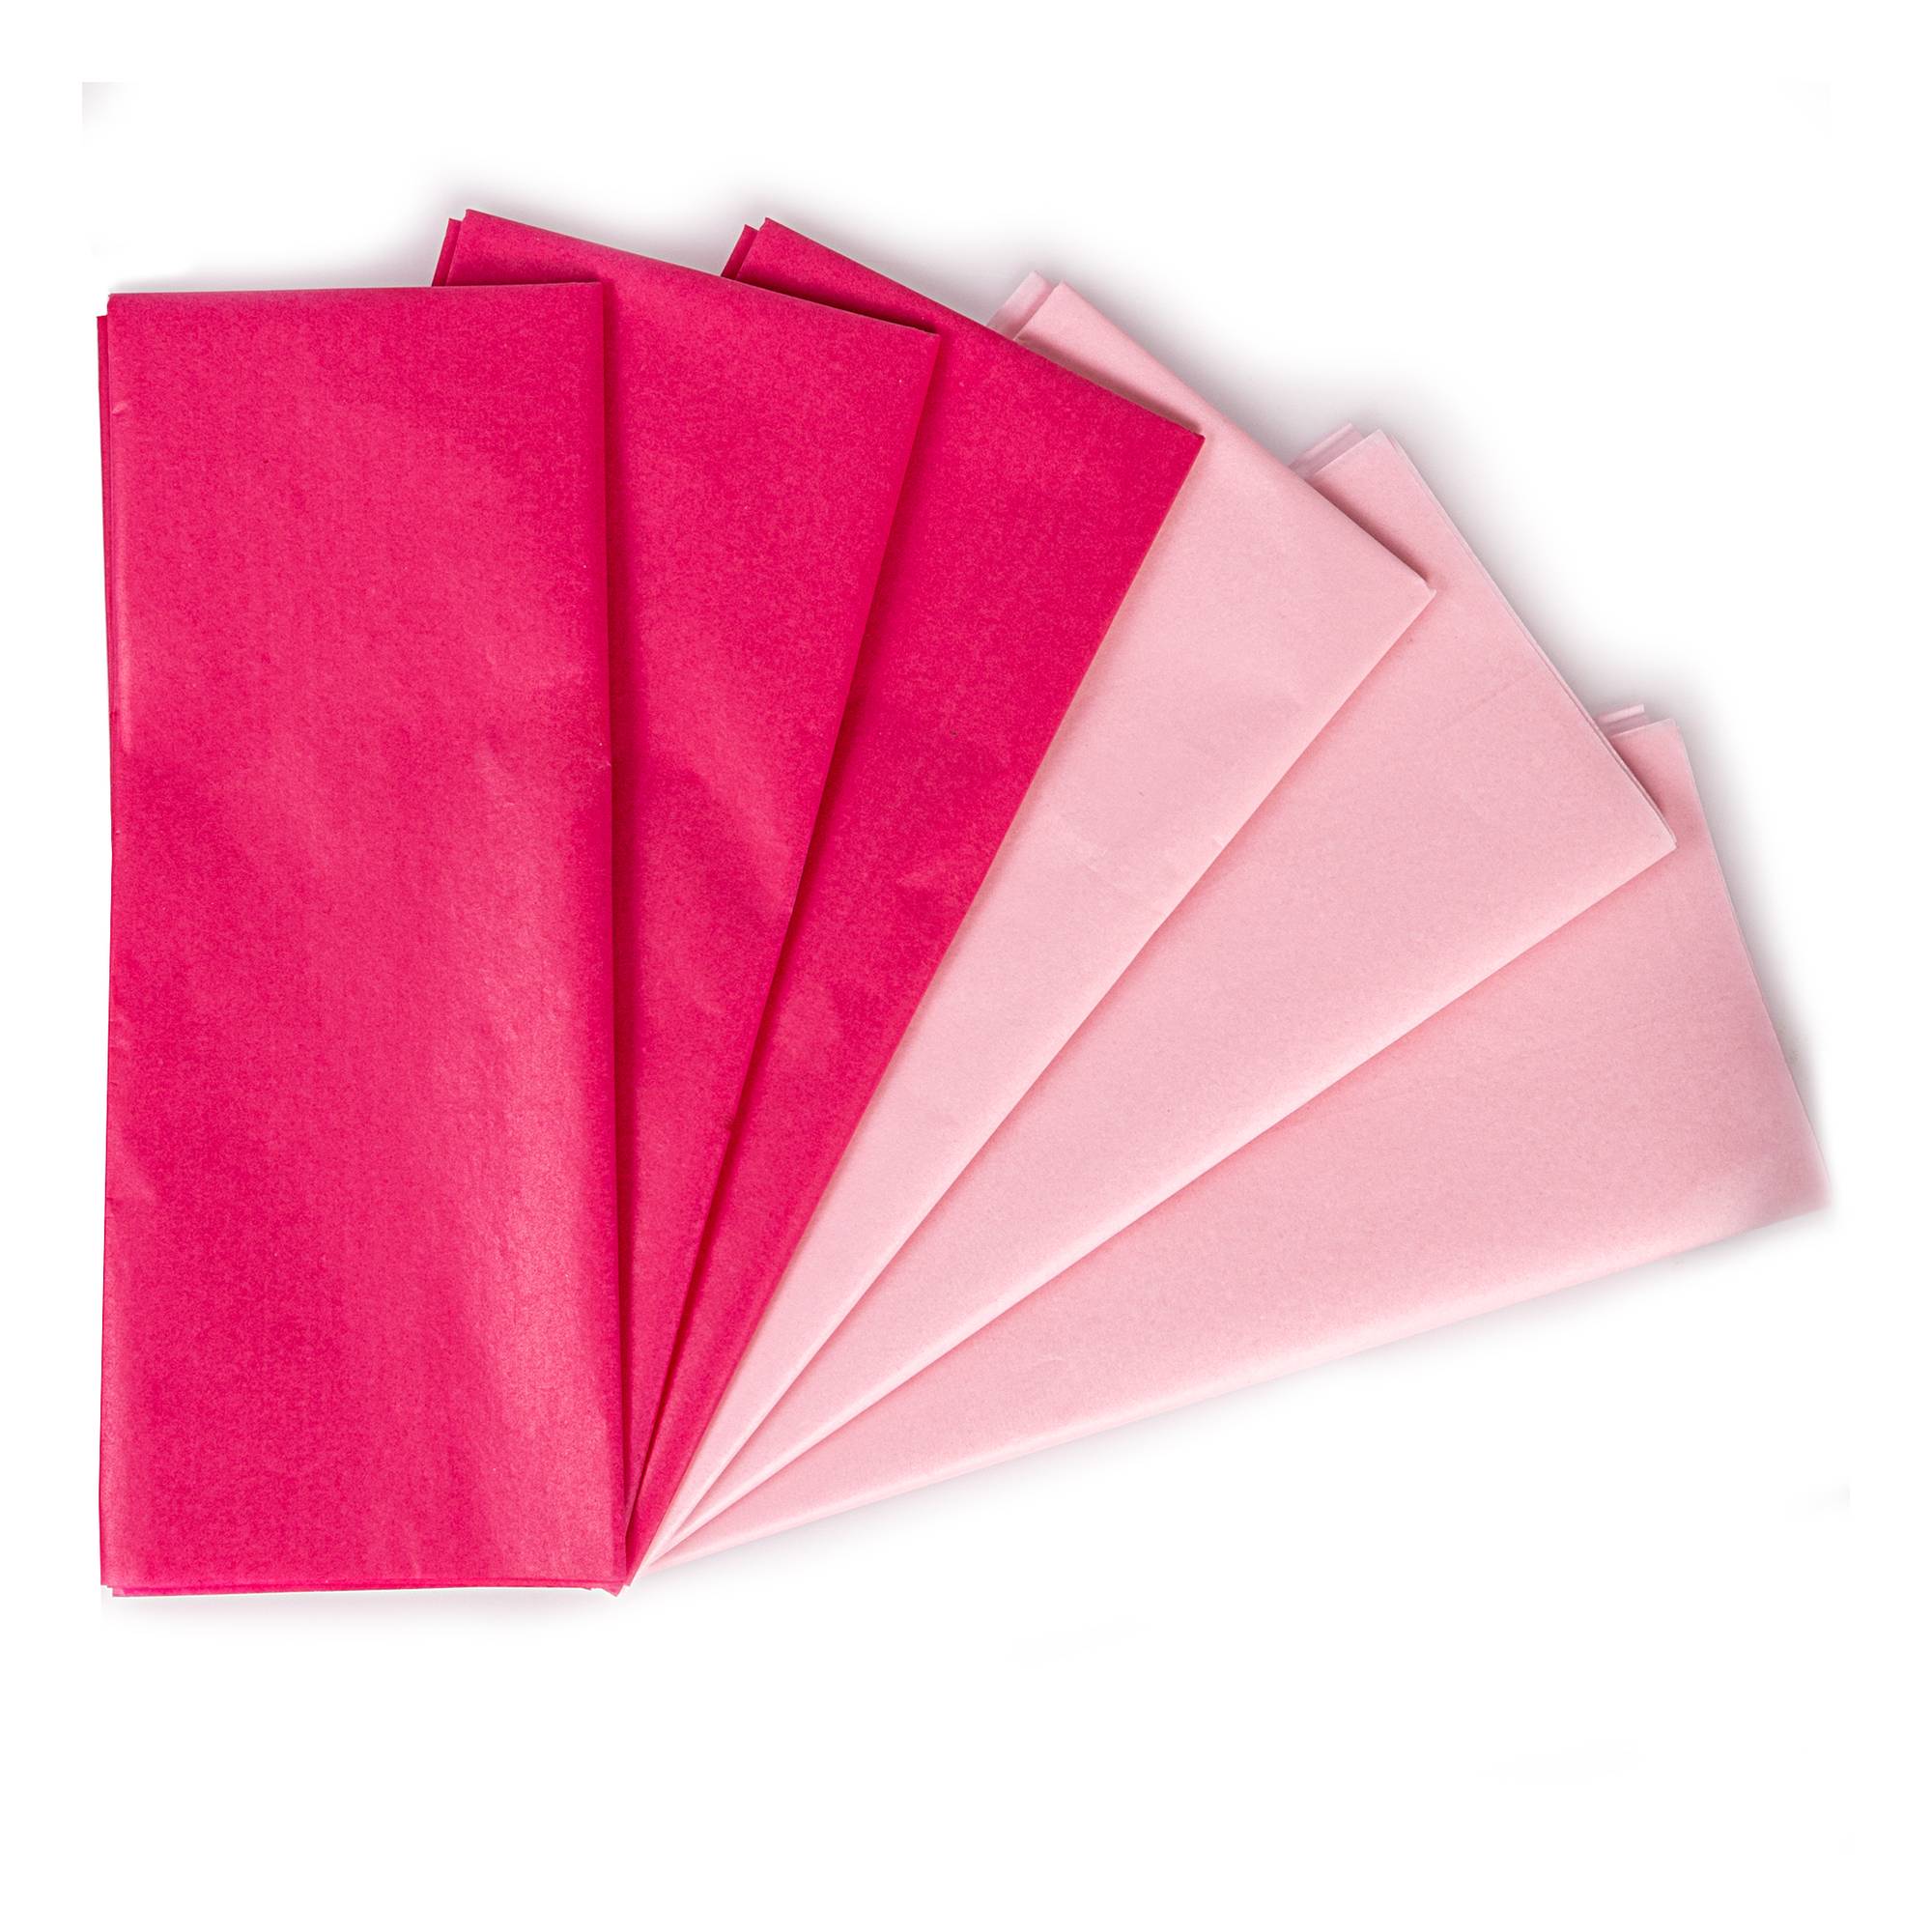 Hot Pink and Pink Tissue Paper 50cm x 75cm 6 Pack | Hobbycraft